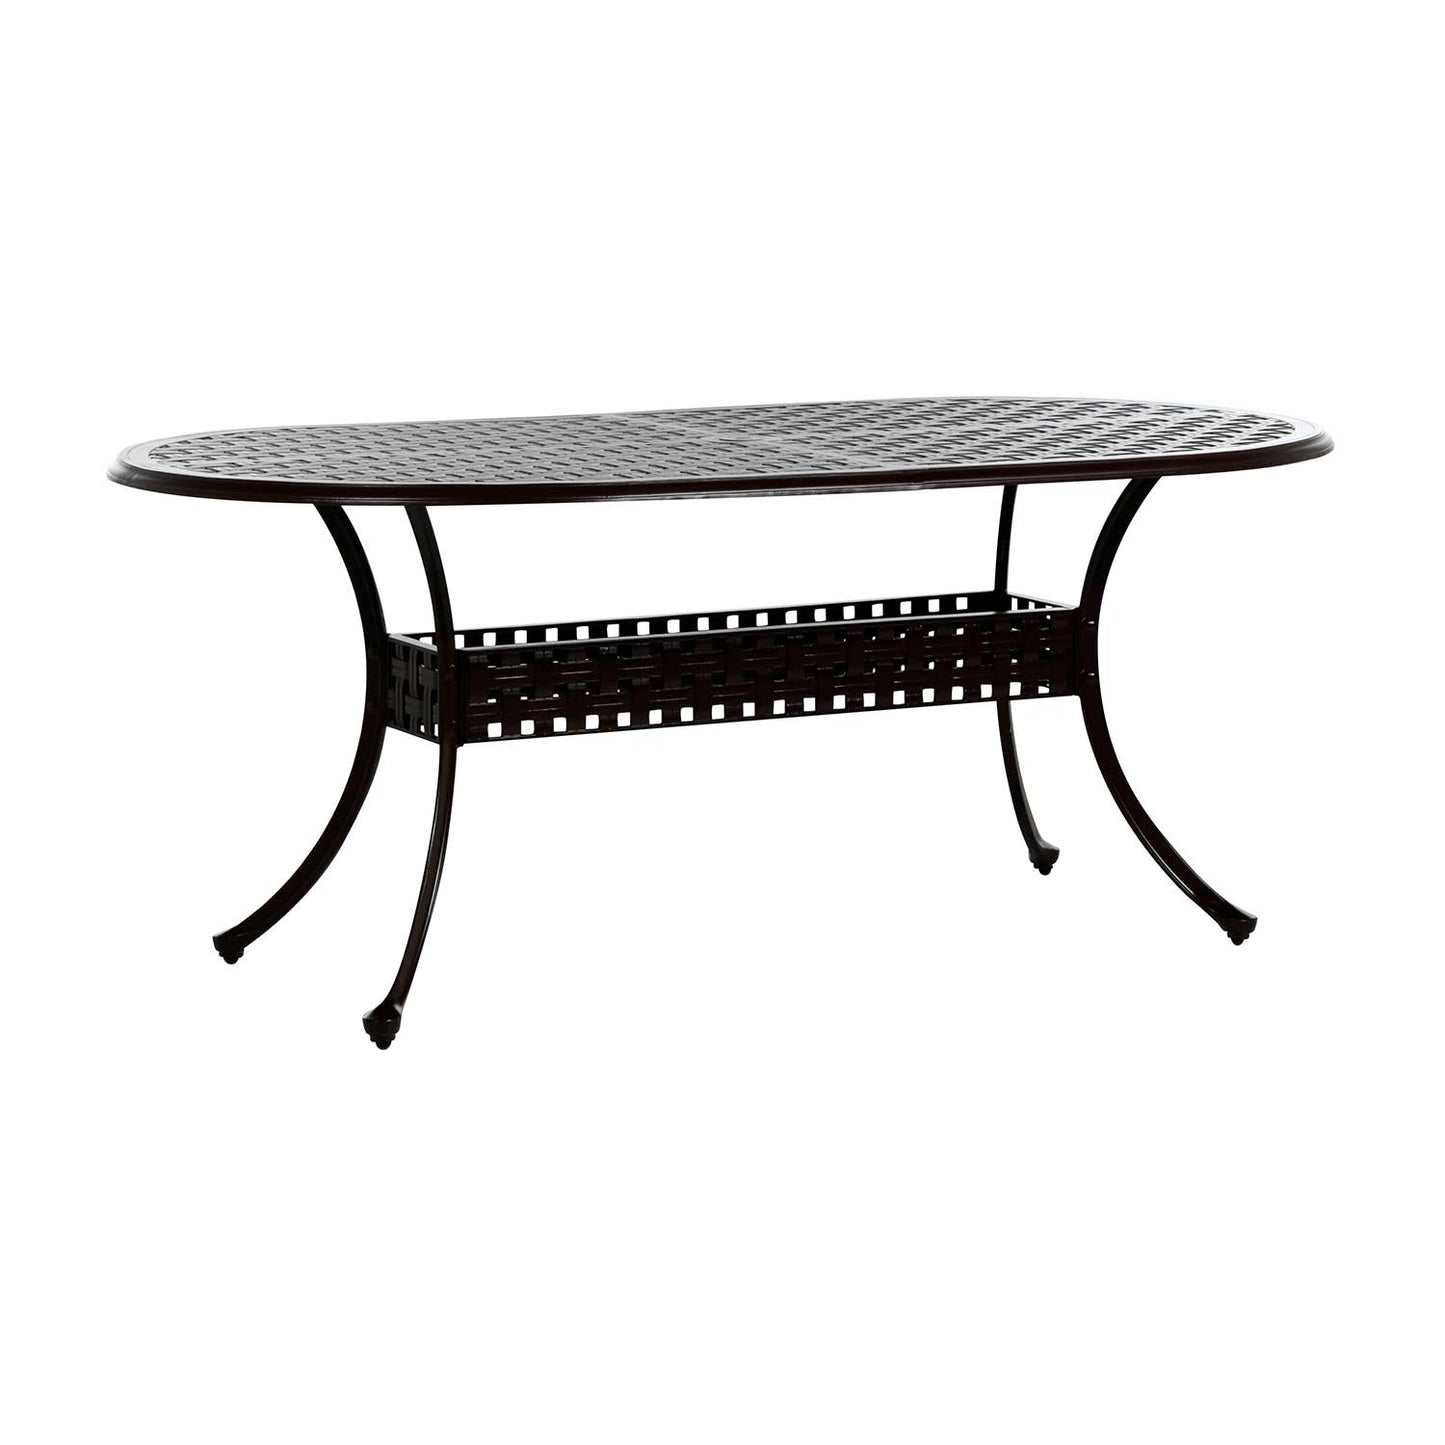 Provance Double Lattice 42" X 84" Oval Dining Table